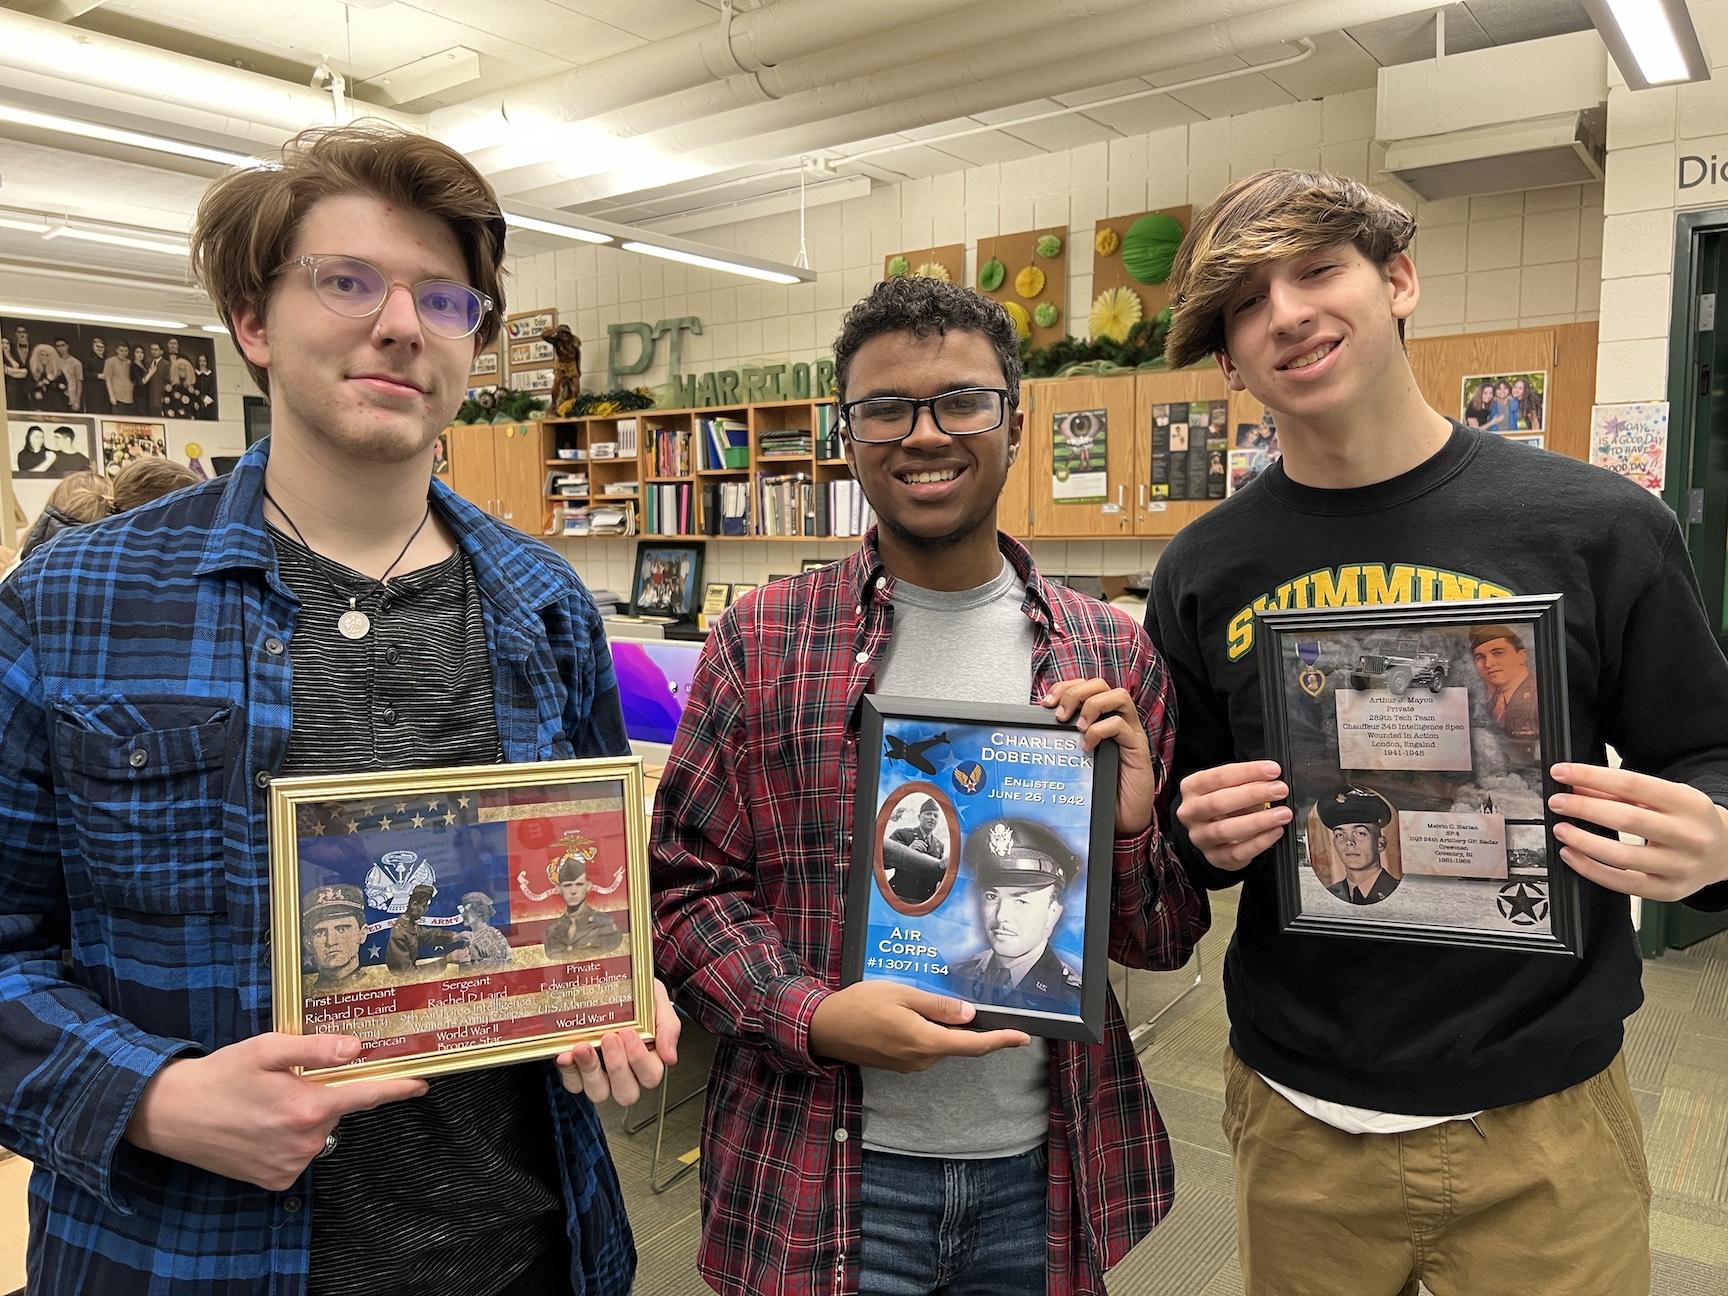 Art Extensions 3 students Zach Grabowski, Quintin Doberneck, and Gabriel Yant with their artwork